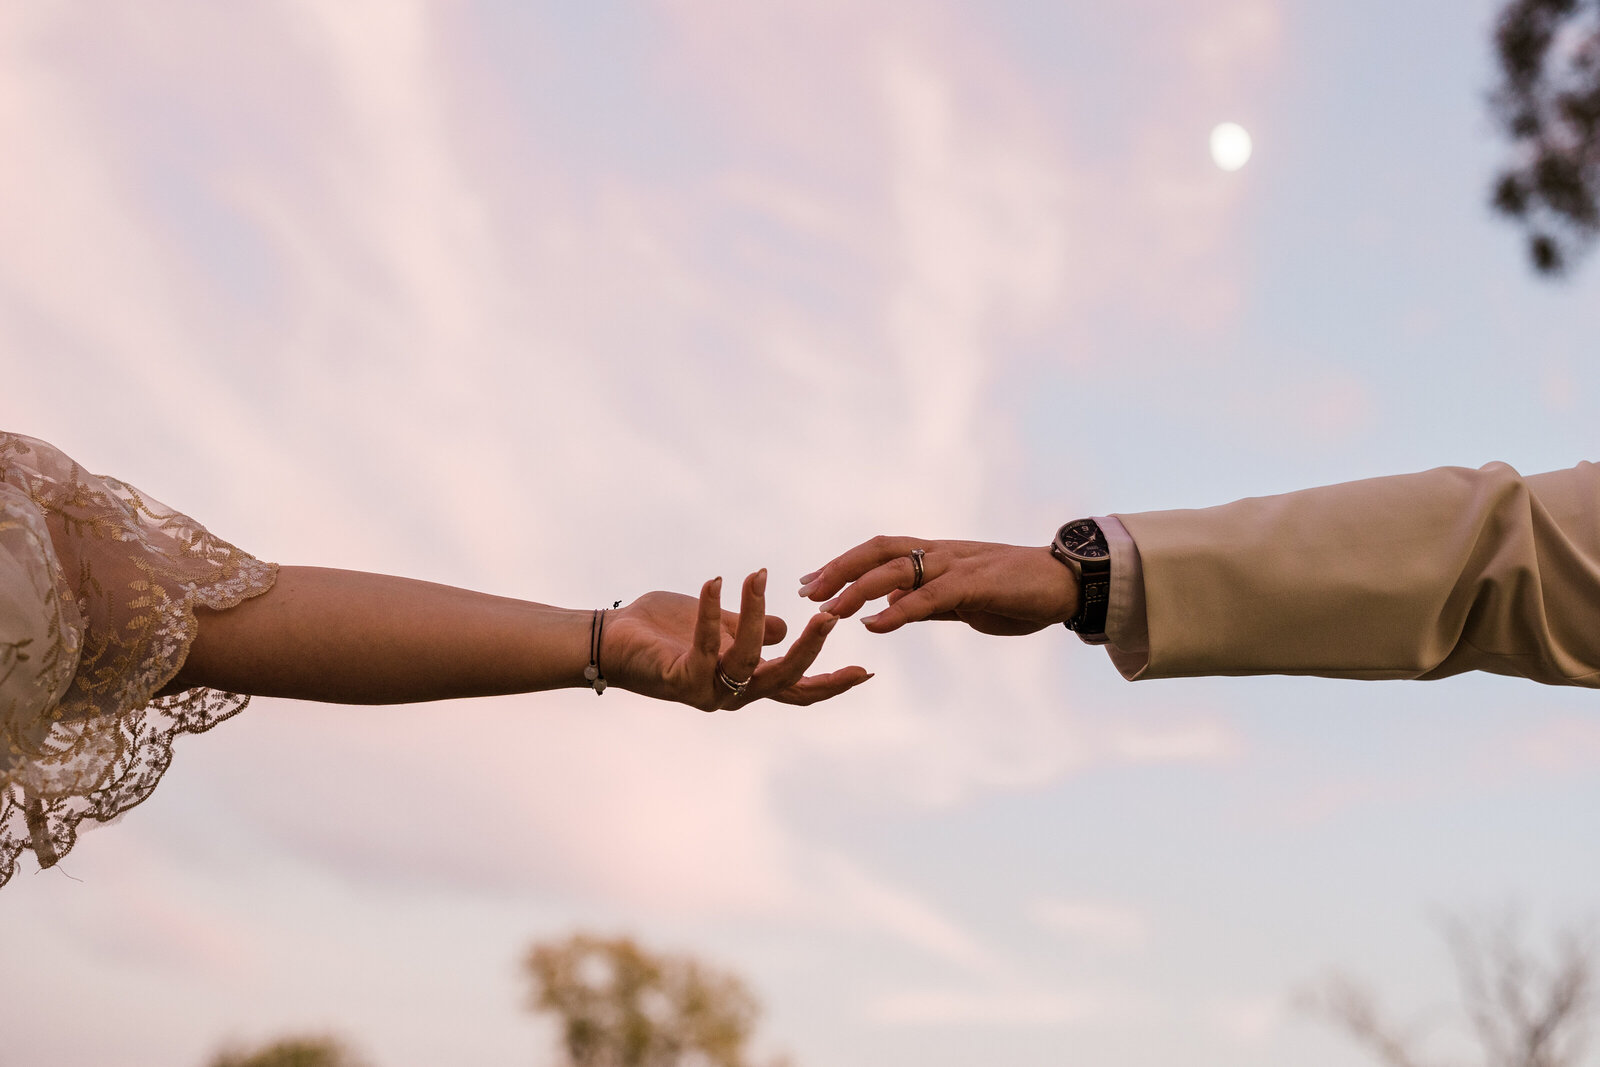 A creative wedding photo featuring two brides hands reaching towards each other. The sunset sky is behind their hands, and it's pink and also features the moon.